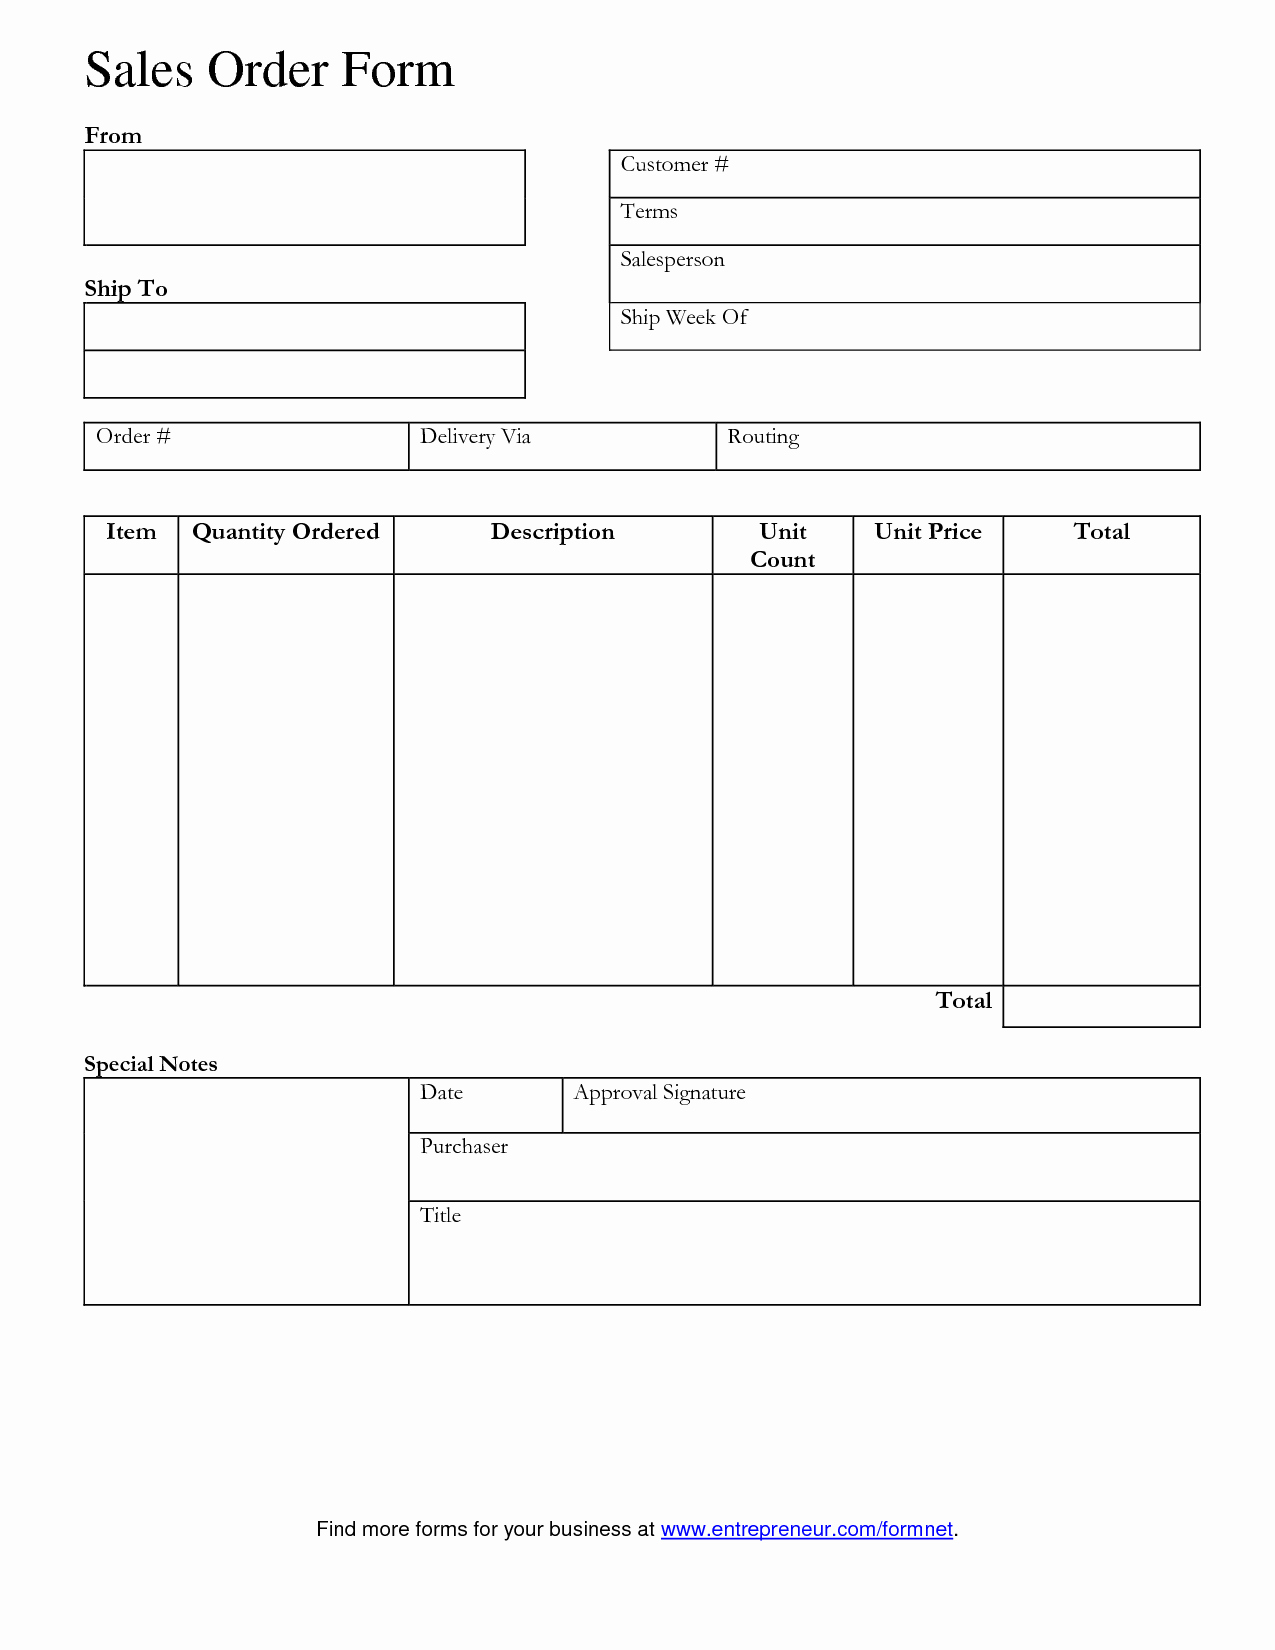 Sales order form Template Best Of Word Template Category Page 4 Urlspark